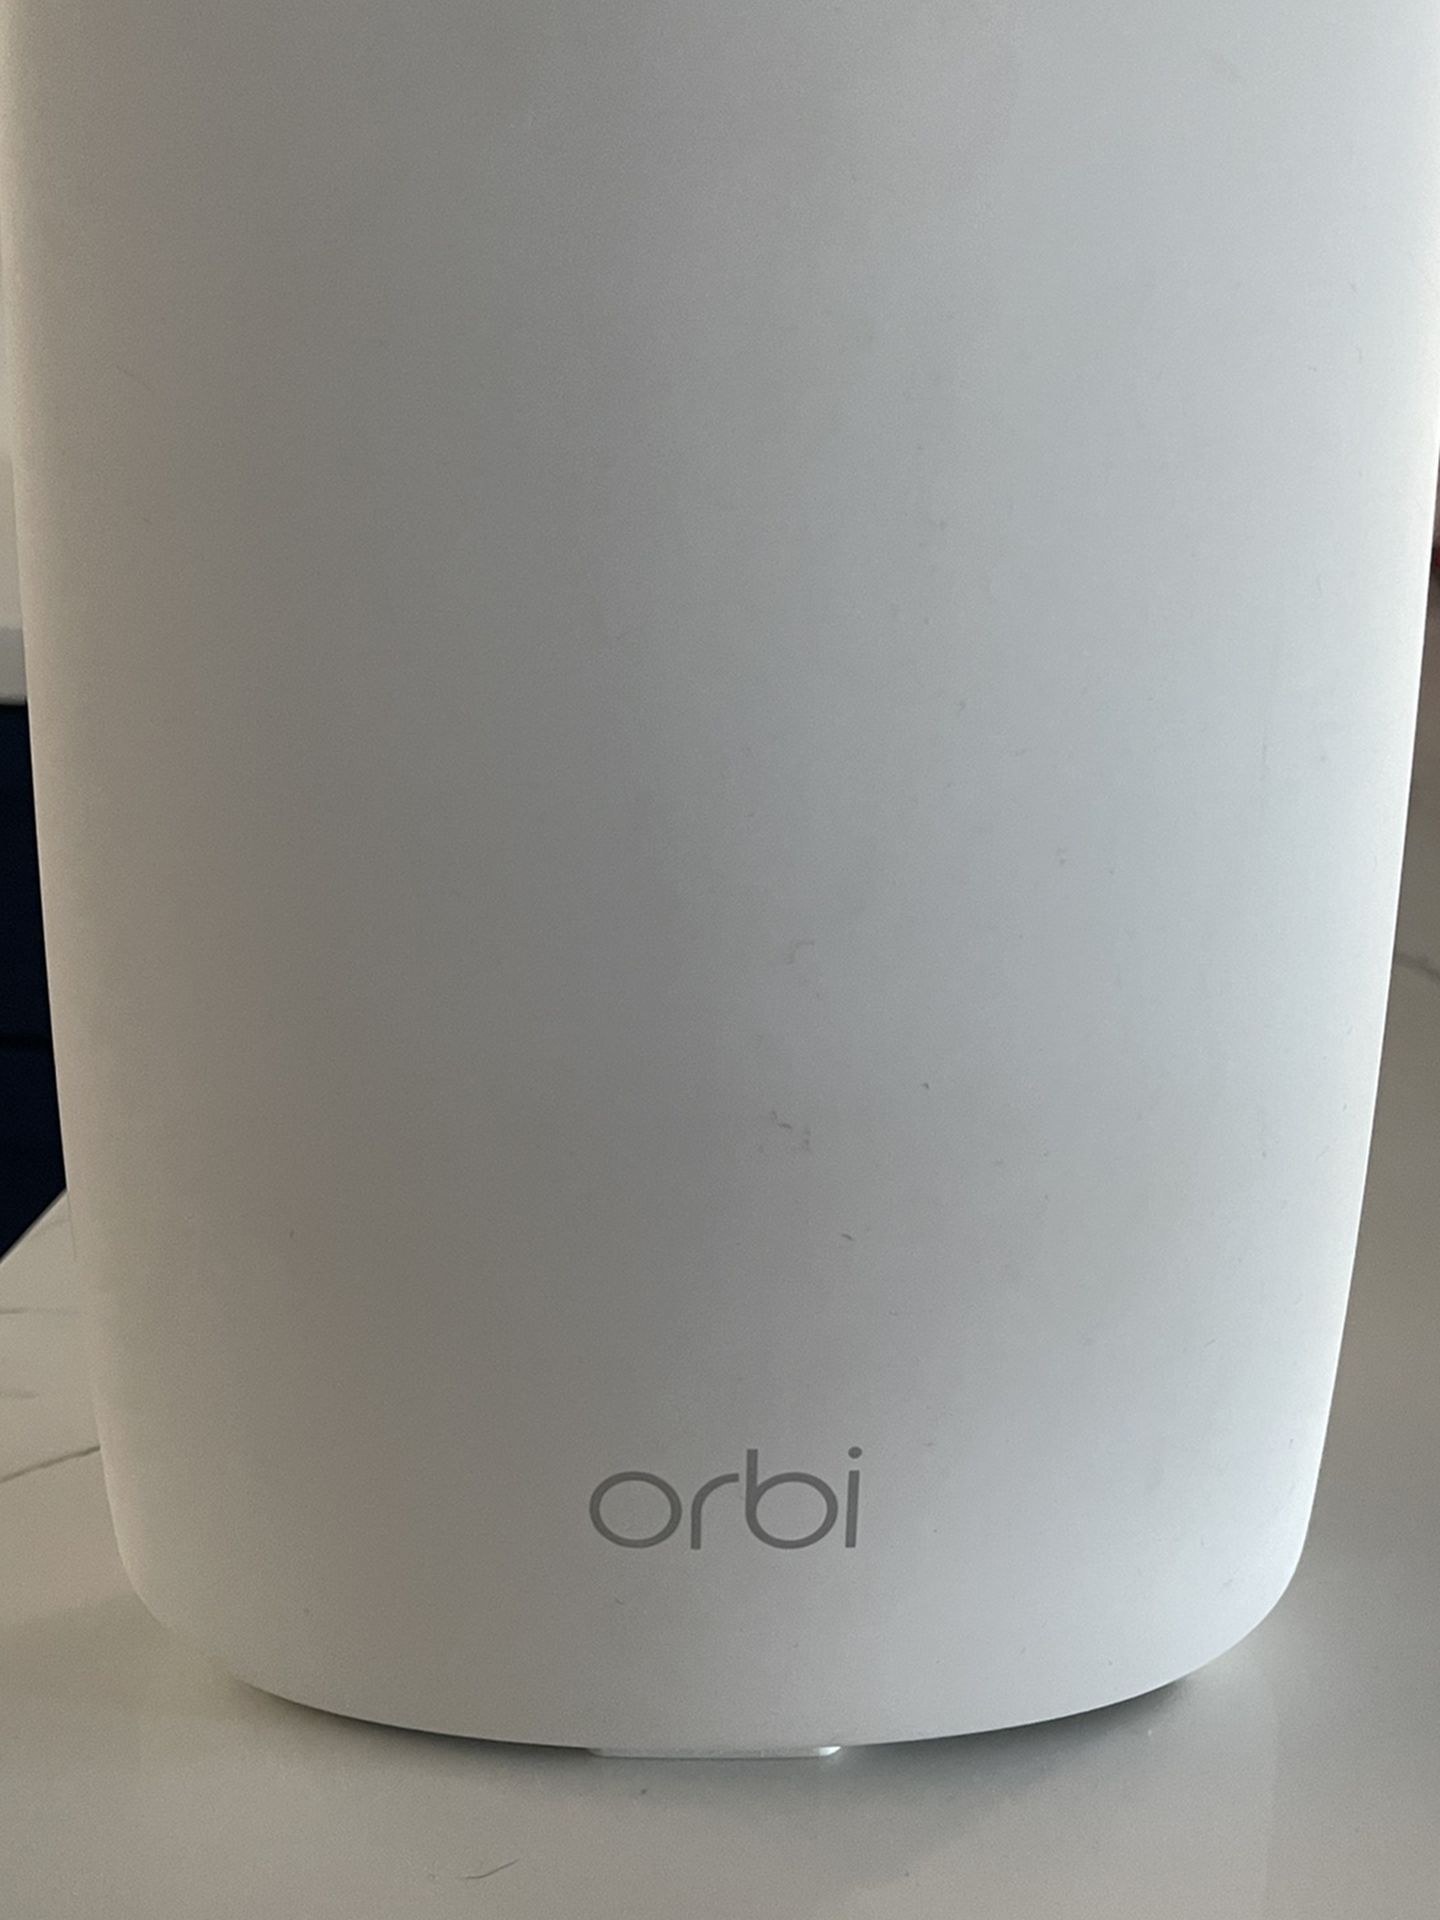 Orbi Mess Tri-band While Home Mesh Wifi System X 3